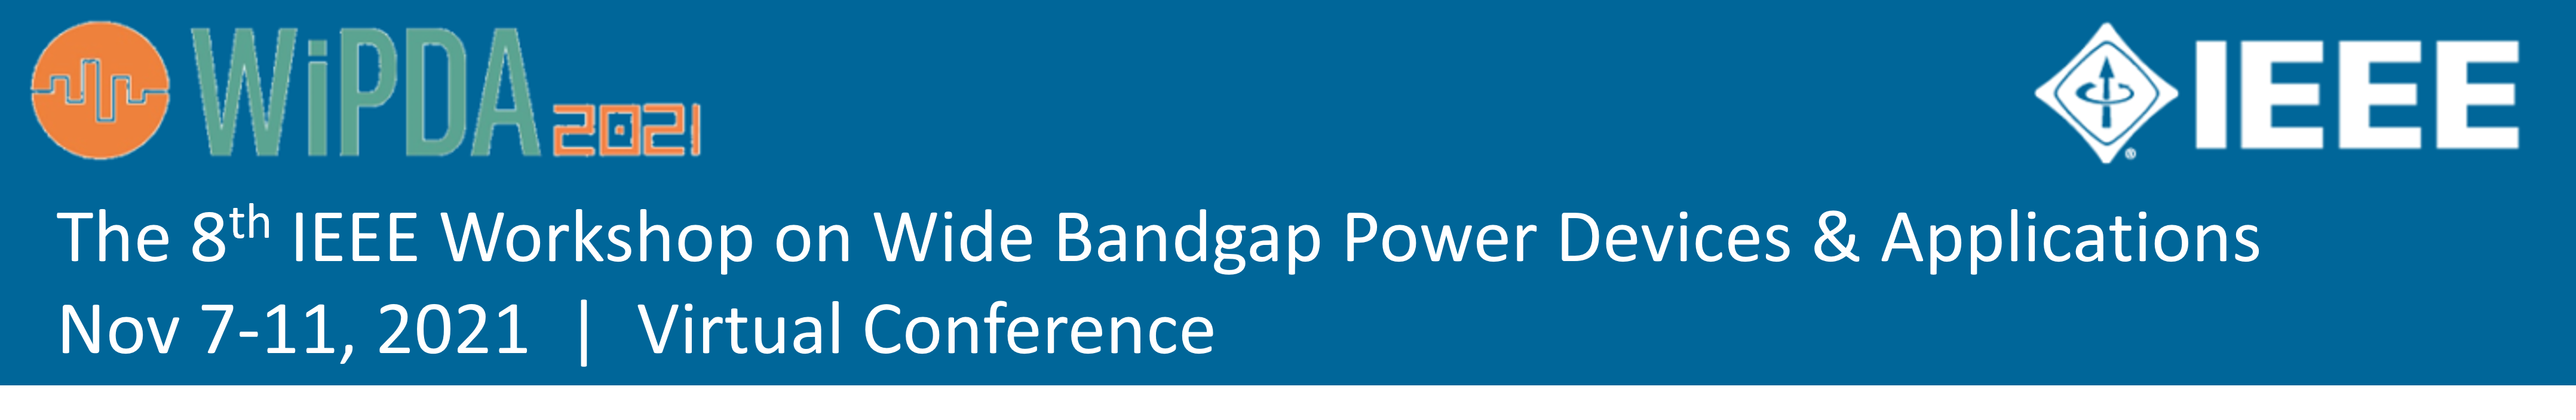 The 8th Workshop on Wide Bandgap Power Devices and Applications (WiPDA 2021) home